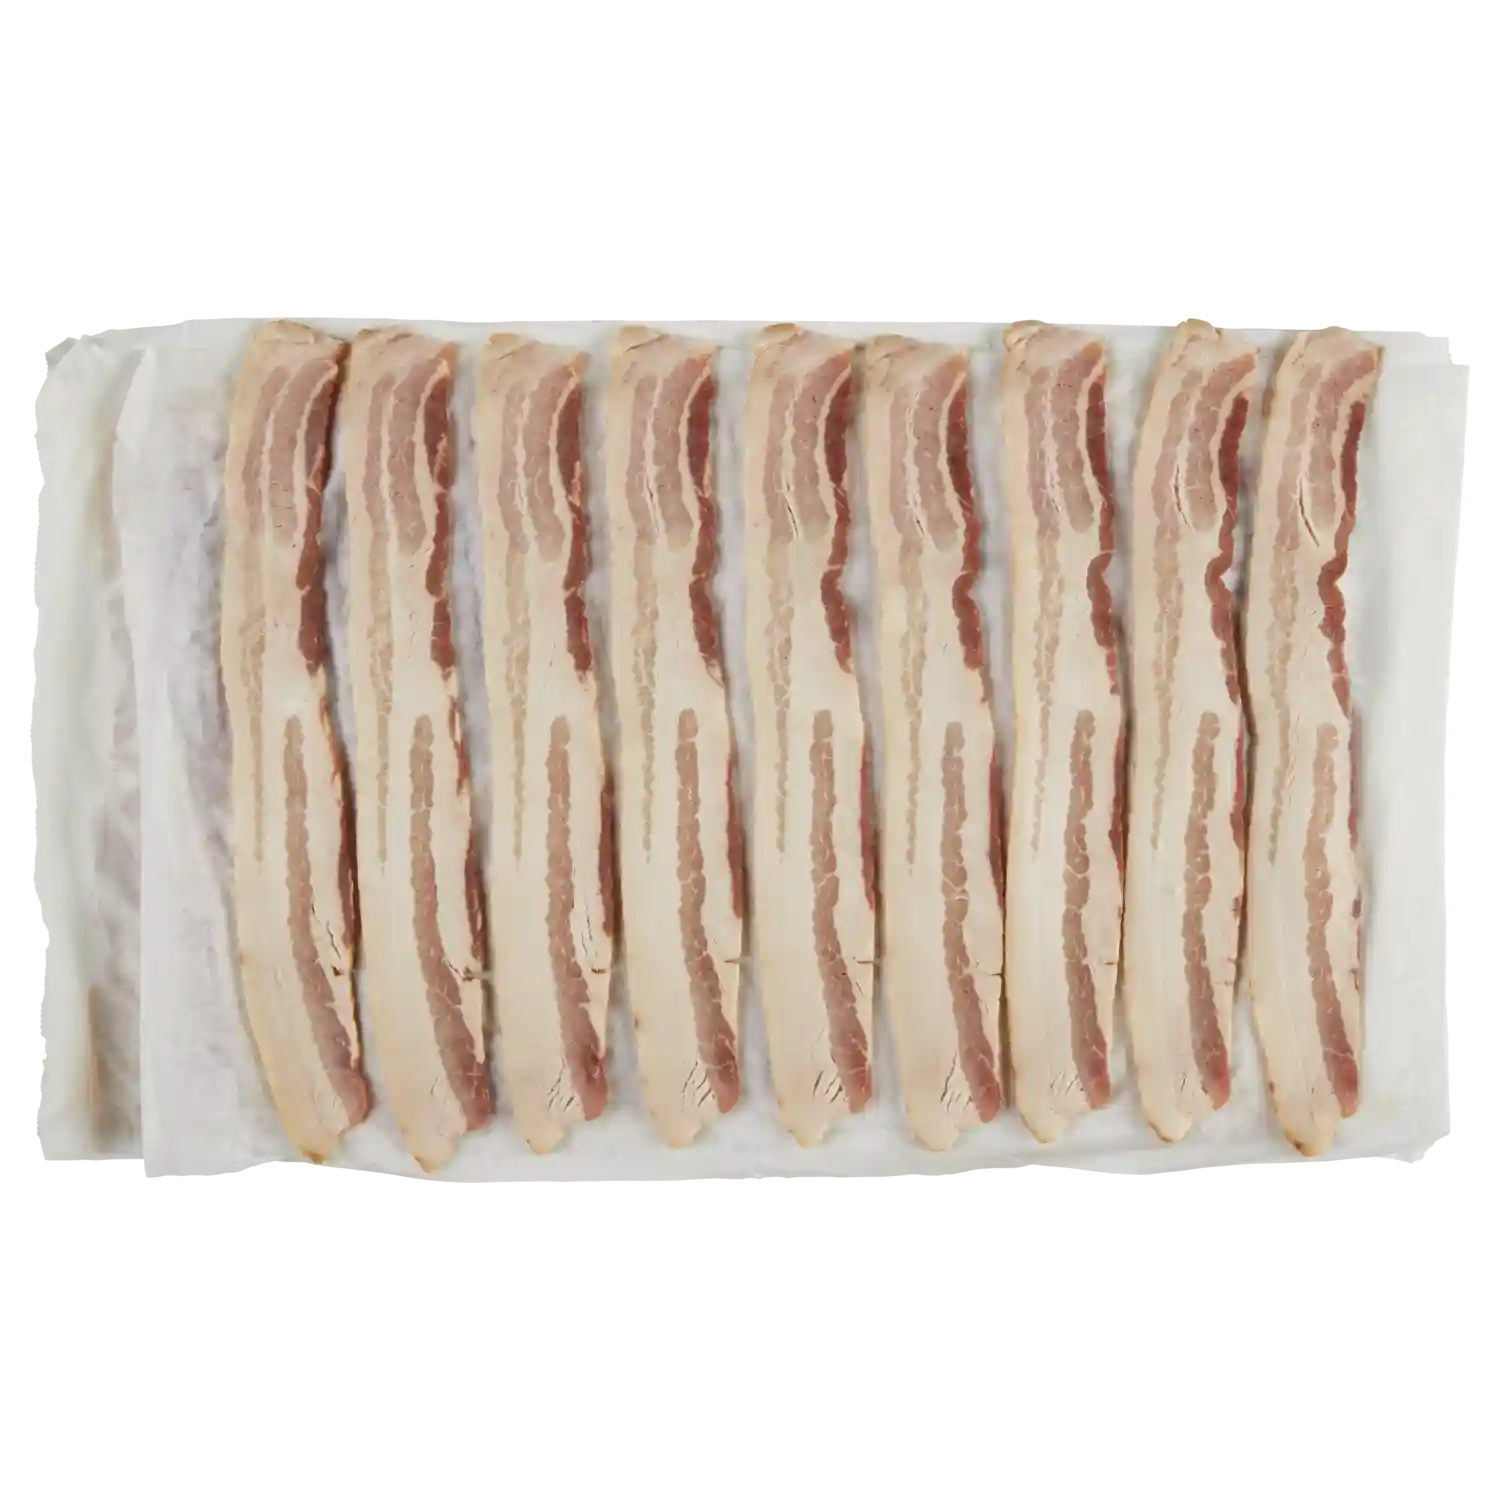 Wright® Brand Naturally Hickory Smoked Regular Sliced Bacon, Flat-Pack®, 15 Lbs, 14-18 Slices per Pound, Frozen_image_31